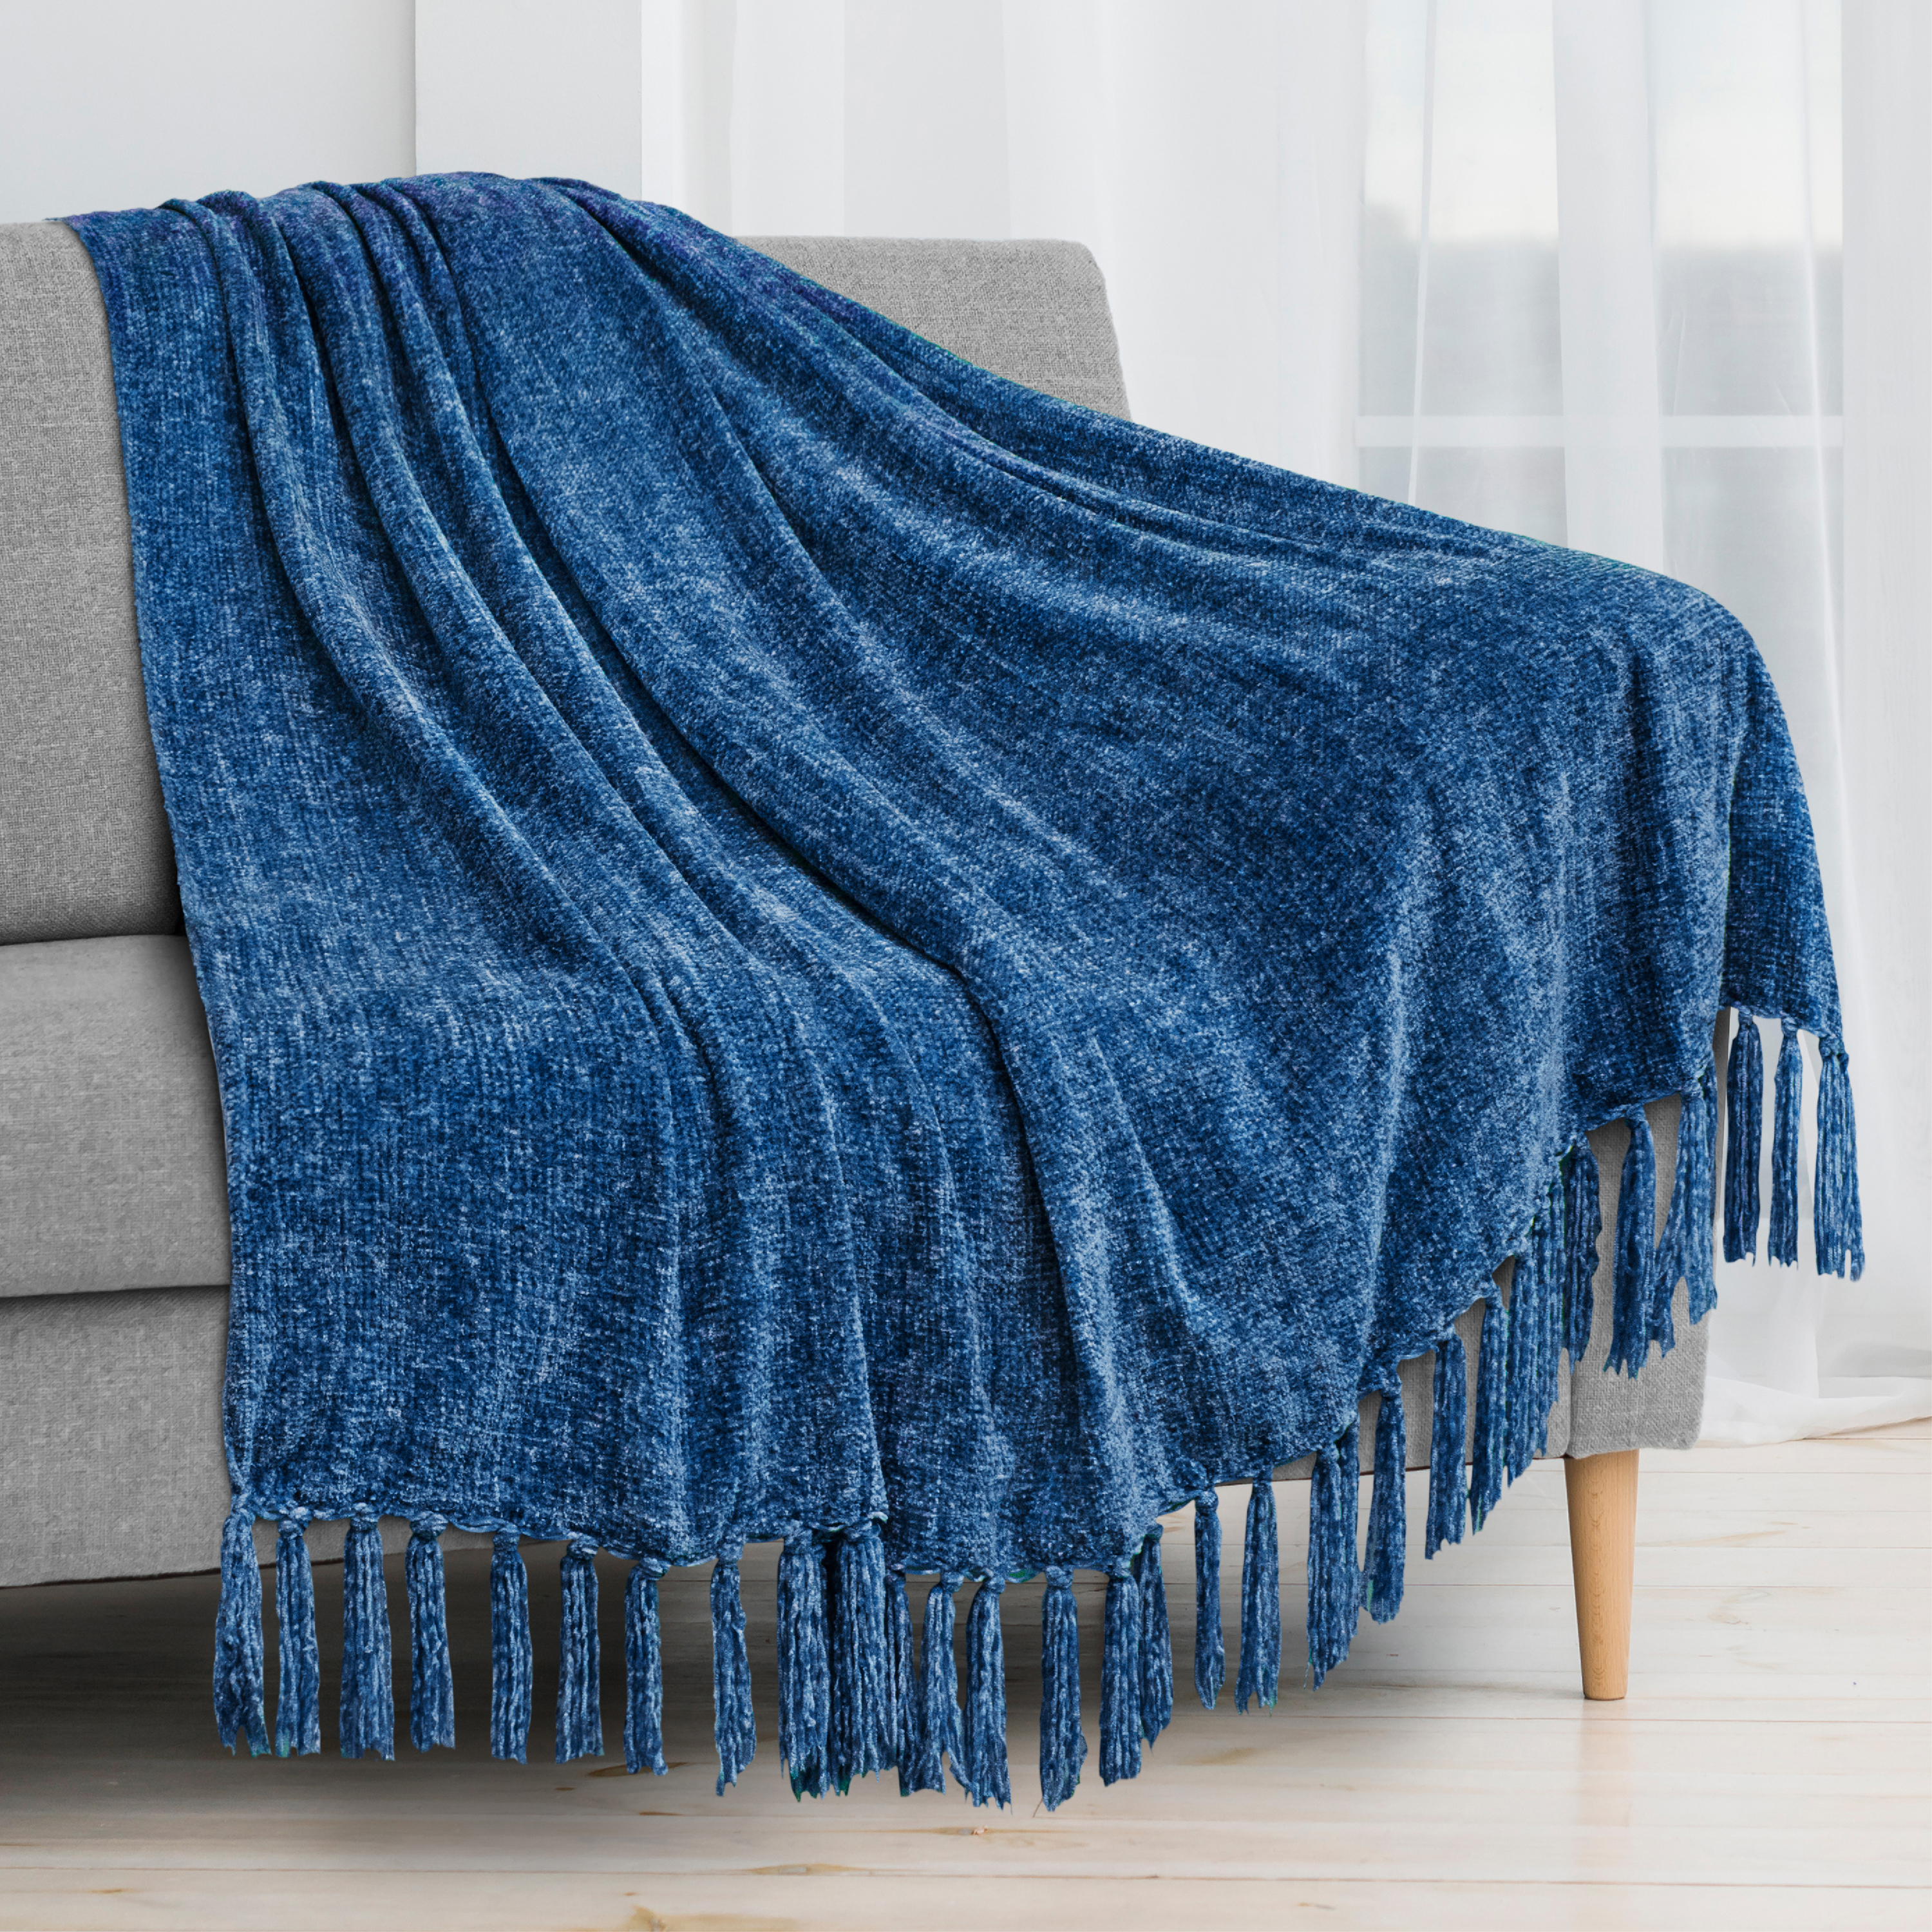 Luxury Knitted Blankets Tassel Throws Tassel Chair Sofa Couch Bed Fringed Cover 